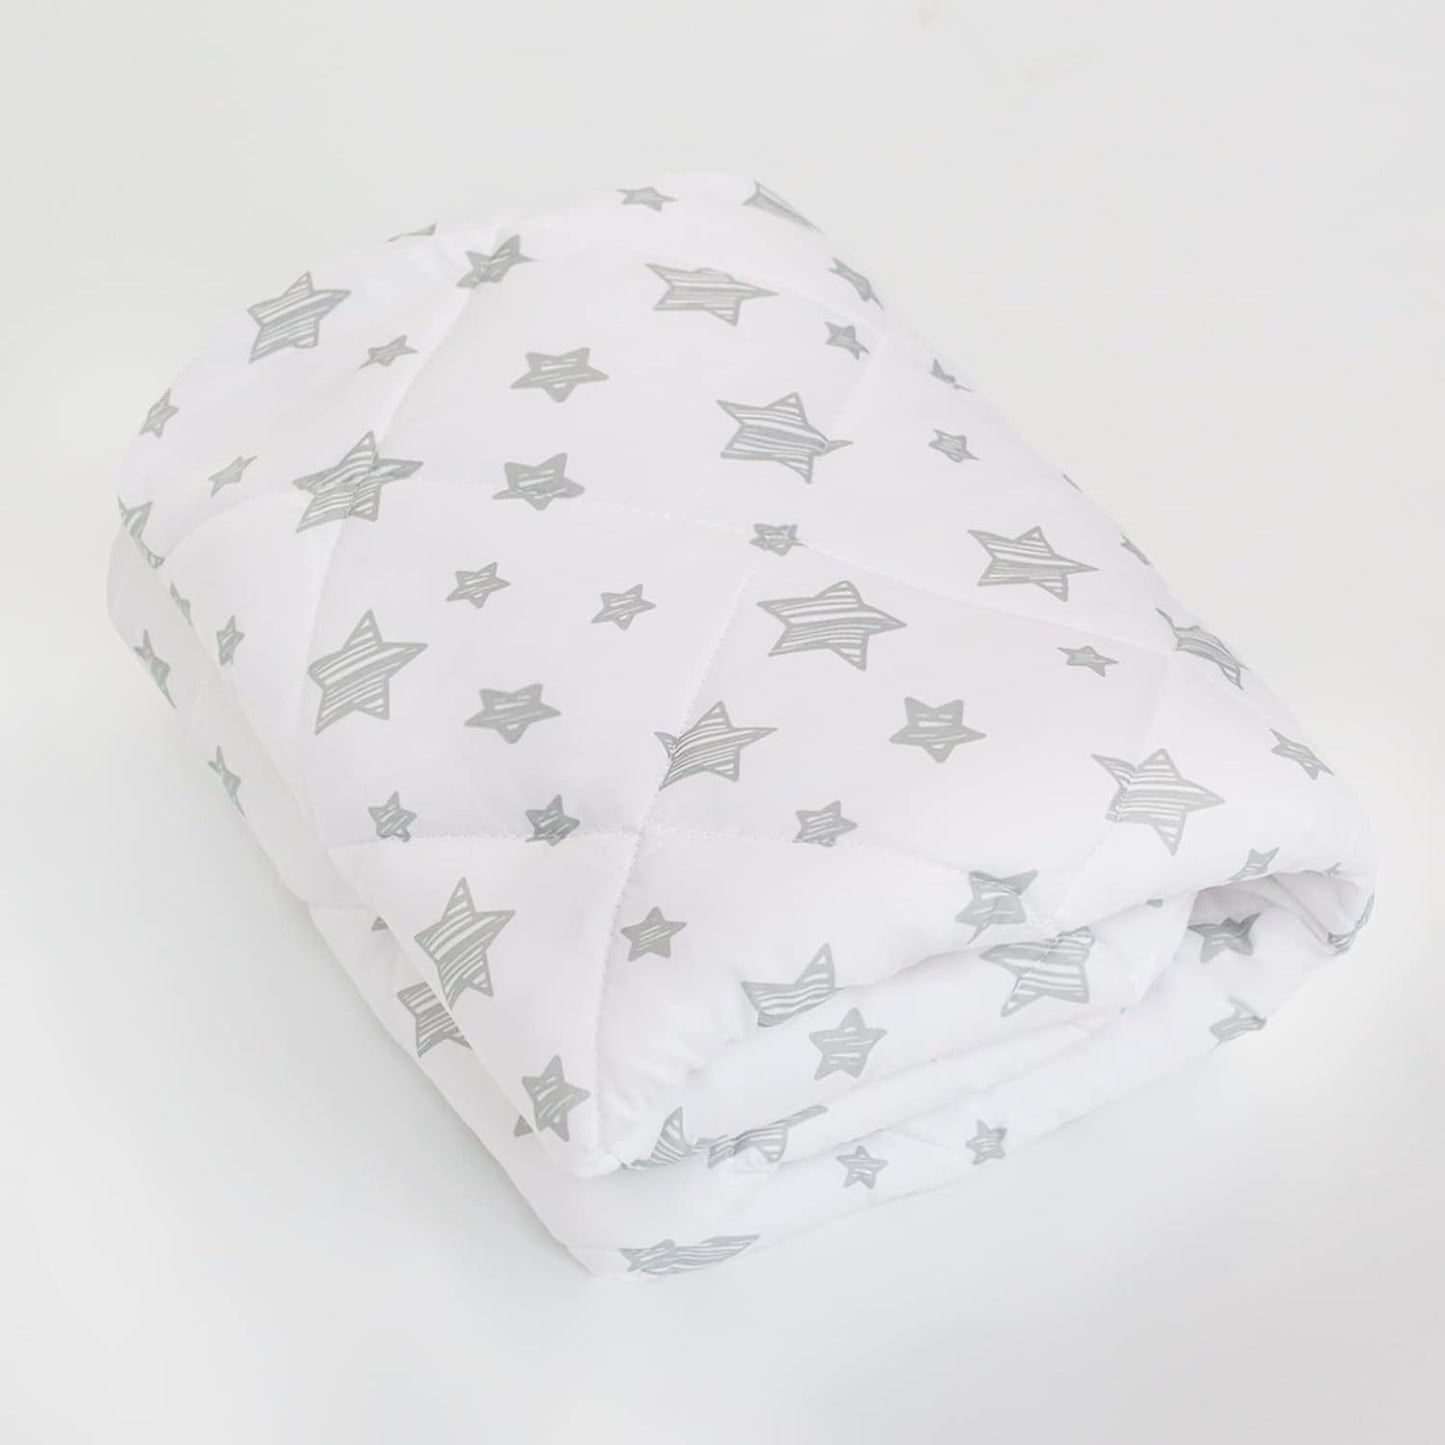 Pack n Play Sheet Quilted | Mini Crib Sheet - Pack and Play Mattress Pad Cover, Ultra-Soft Microfiber, Fits Graco Pack and Play, White Star